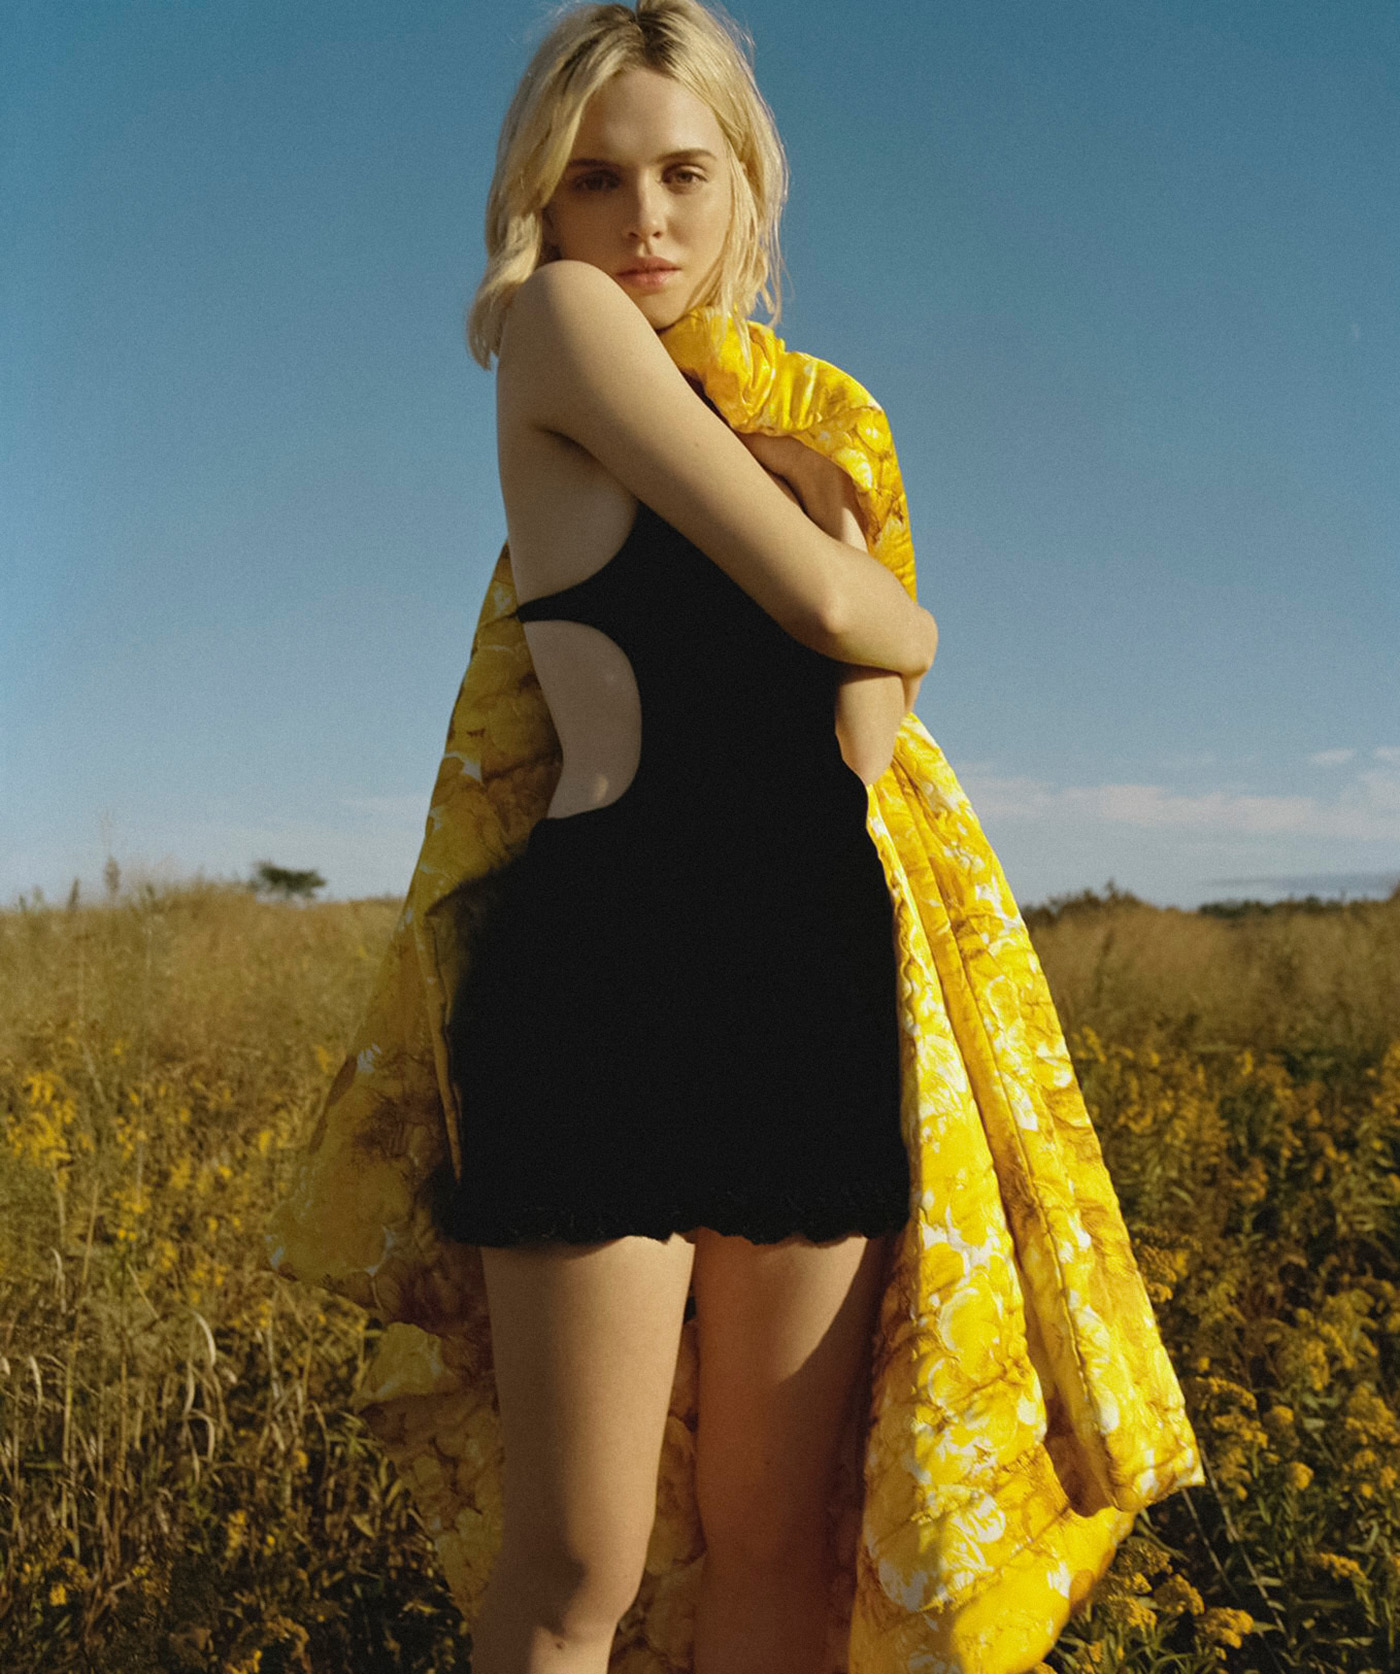 Odessa Young by Jon Ervin for Vogue Australia February 2022